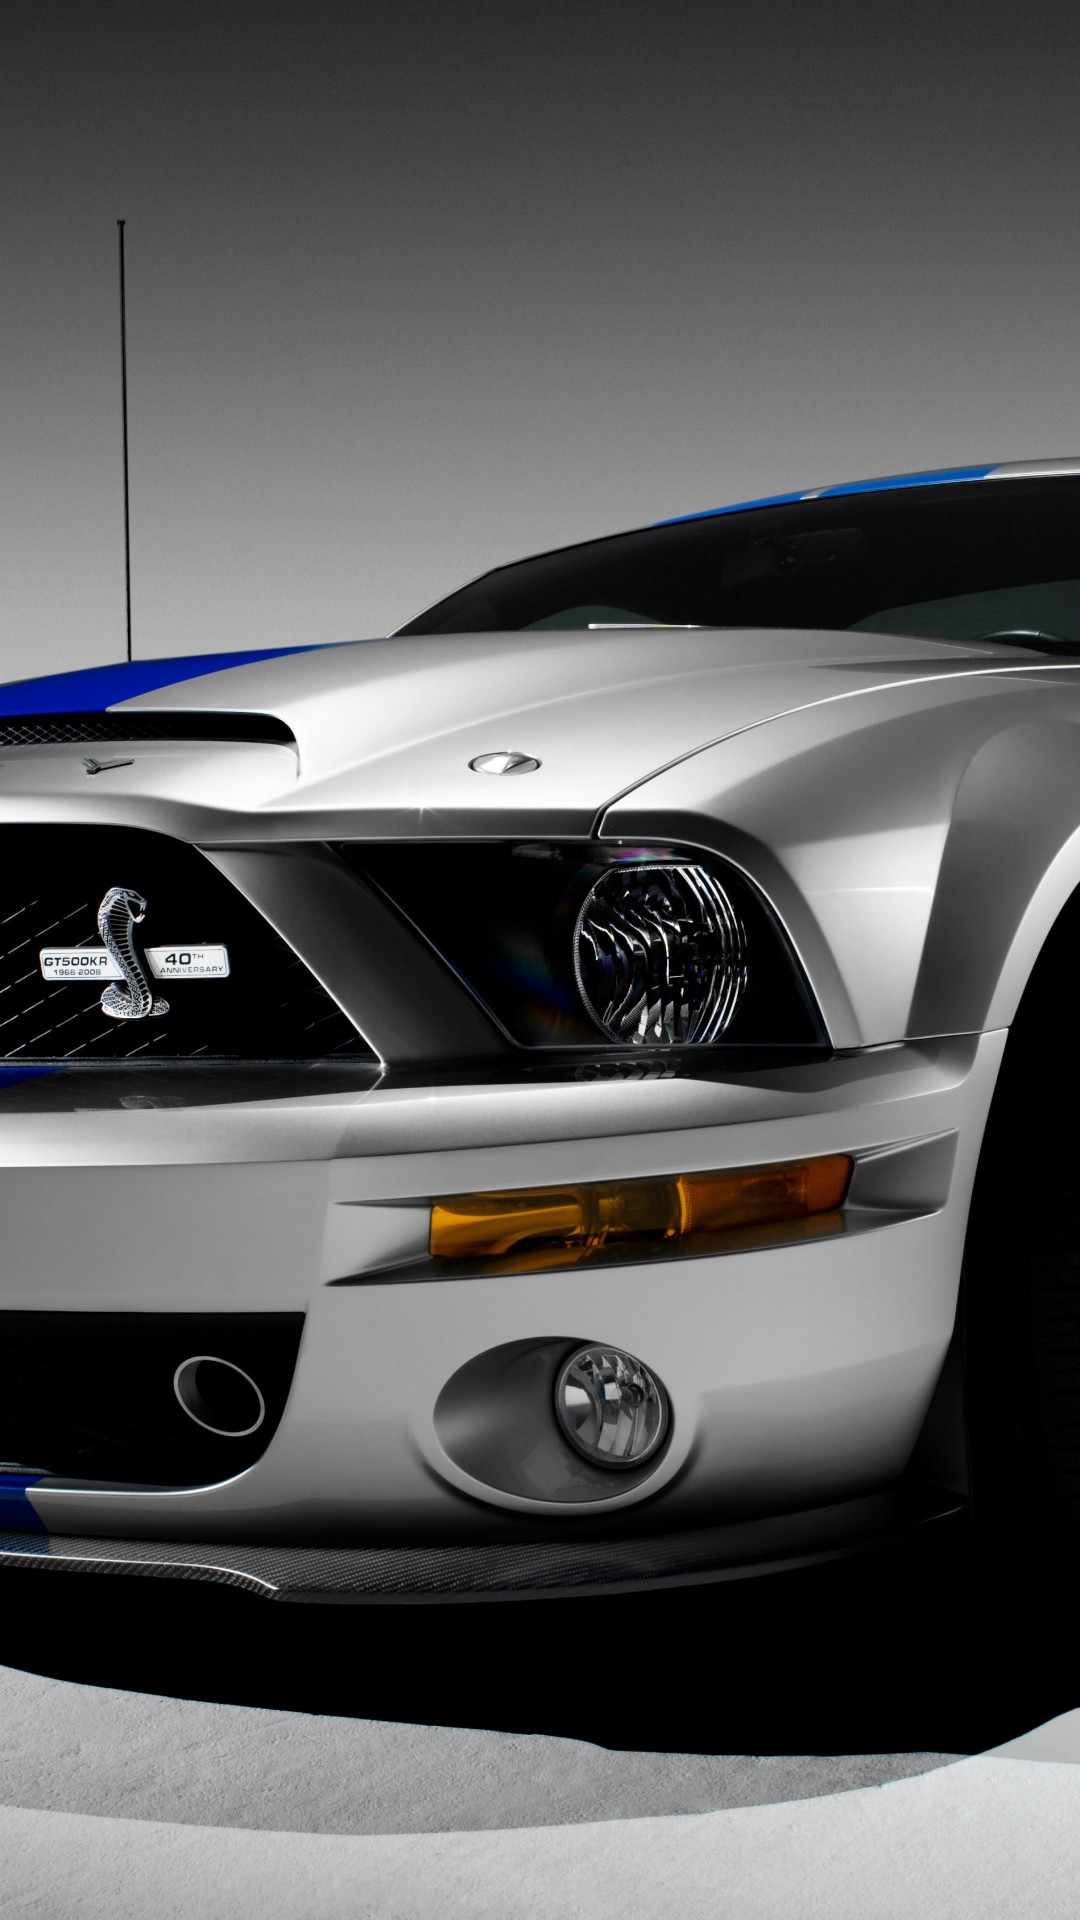 Shelby Mustang GT500KR Wallpaper for SONY Xperia Z3